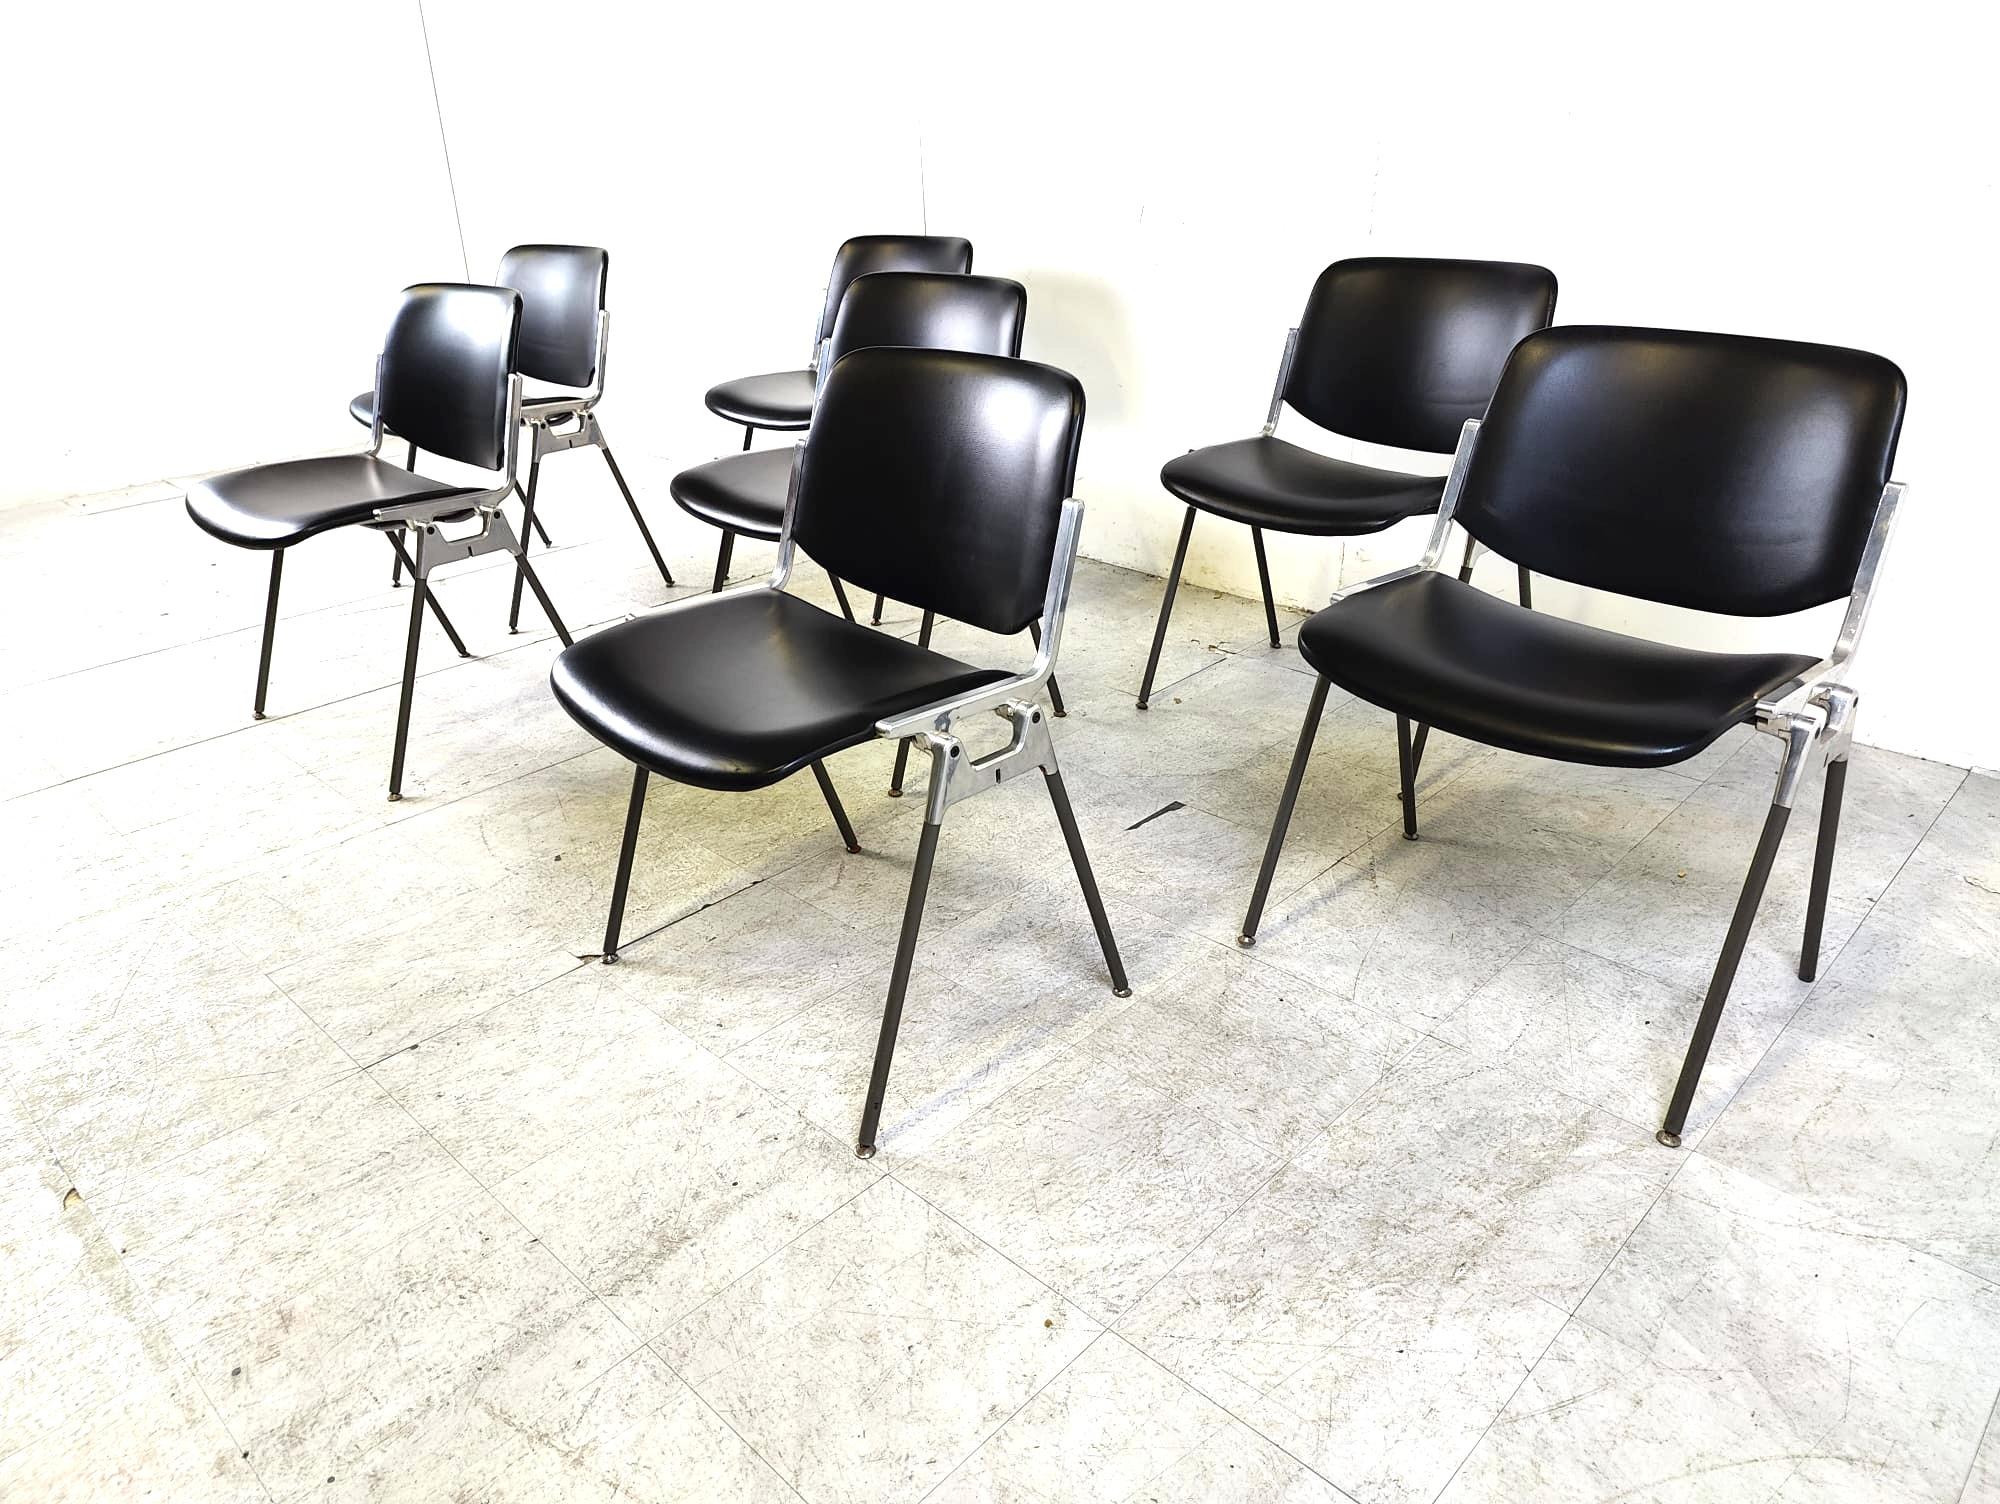 Vintage dining chairs or side chairs designed by Giancarlo Piretti for Castelli, set of 7

These chairs can be stacked and save up a lot of space for occasional use.

Good condition

Dimensions:
Height: 77cm/30.31